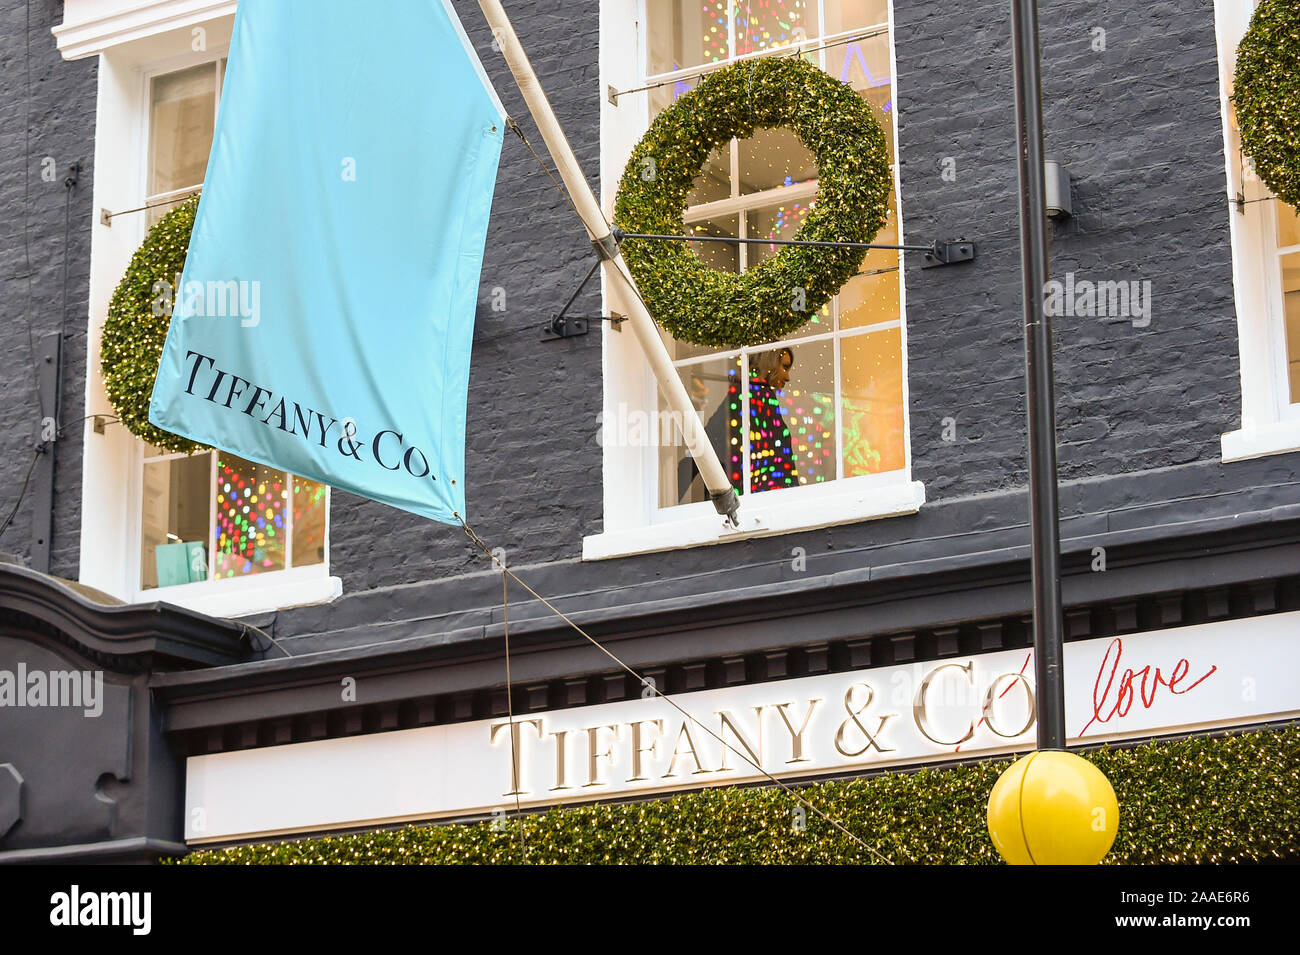 London, UK.  21 November 2019.  Christmas decorations on the exterior of the Tiffany & Co store in Mayfair.  Retailers continue to battle against losing custom to online sales, but high-end, luxury stores offer a shopping experience to wealthy buyers visiting from overseas. LVMH, the company owned by the family of Europe's wealthiest man Bernard Arnault, is currently bidding to buy Tiffany & Co. for US$16bn.   Credit: Stephen Chung / Alamy Live News Stock Photo